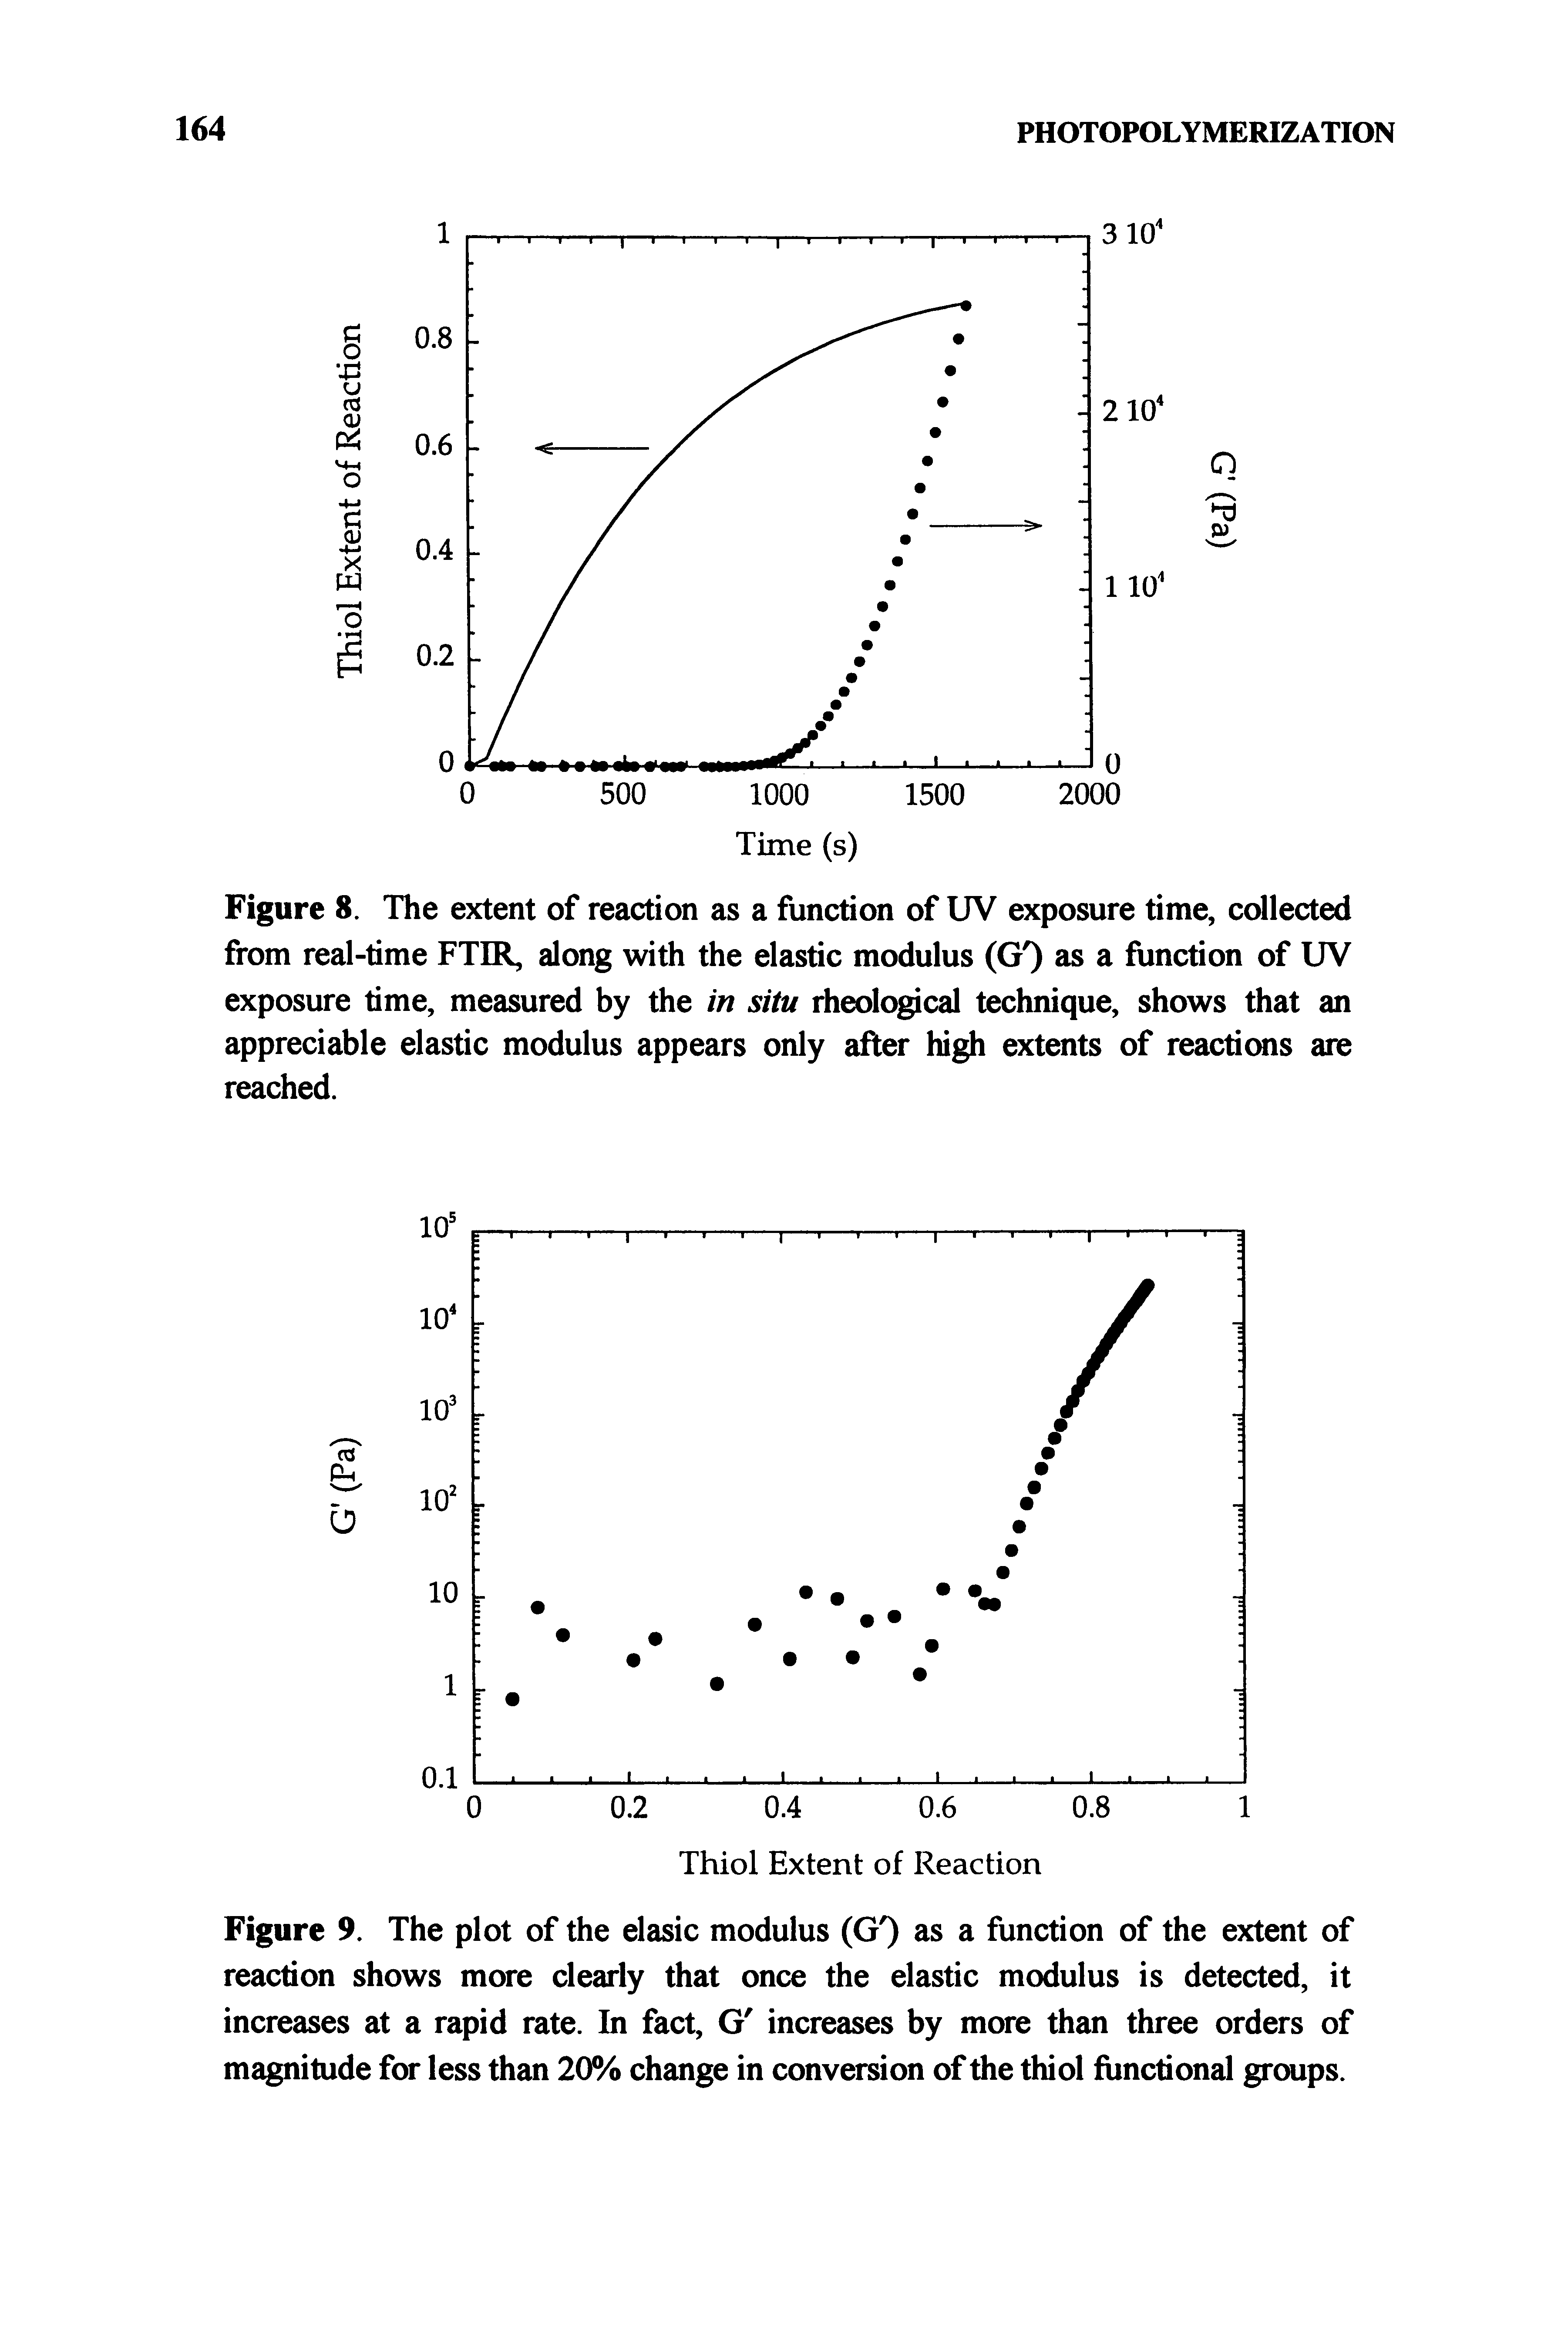 Figure 8. The extent of reaction as a function of UV exposure time, collected from real-time FTIR, along with the elastic modulus (GO as a function of UV exposure time, measured by the in situ rheological technique, shows that an appreciable elastic modulus appears only after high extents of reactions are reached.